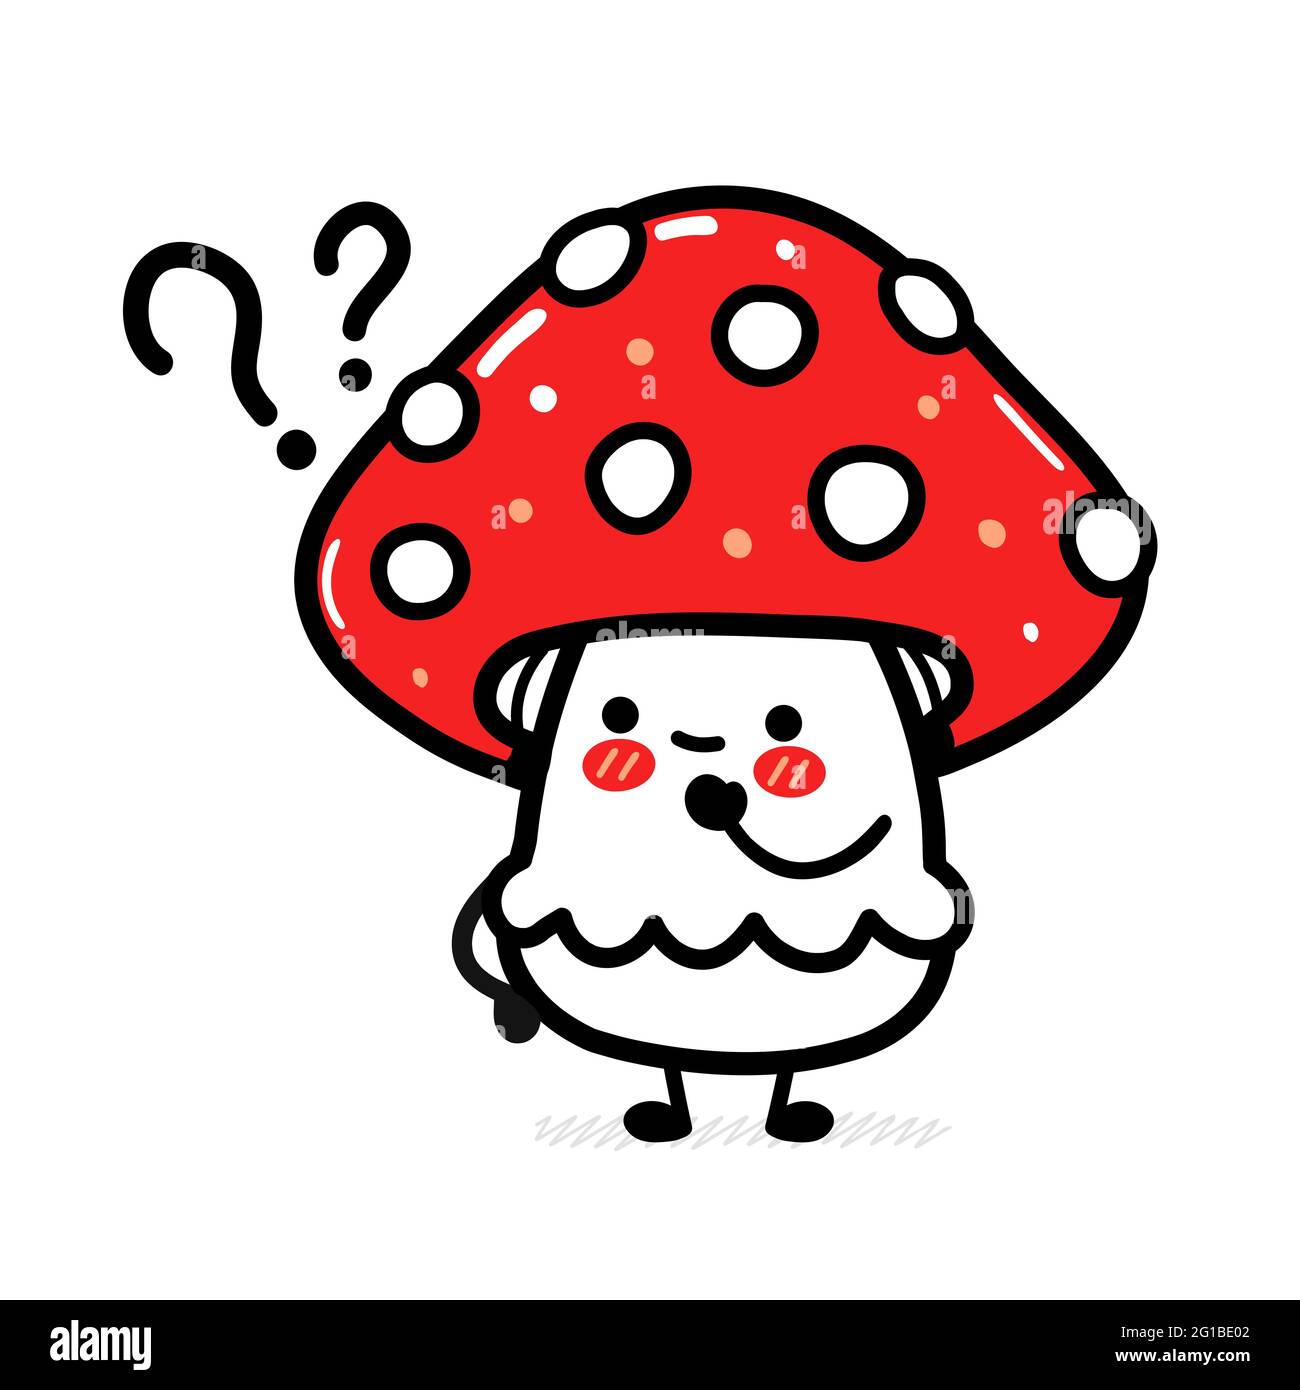 Cute funny amanita mushroom with question marks. Vector hand drawn cartoon kawaii character illustration icon. Isolated on white background. Funny amanita mushroom mascot character concept Stock Vector